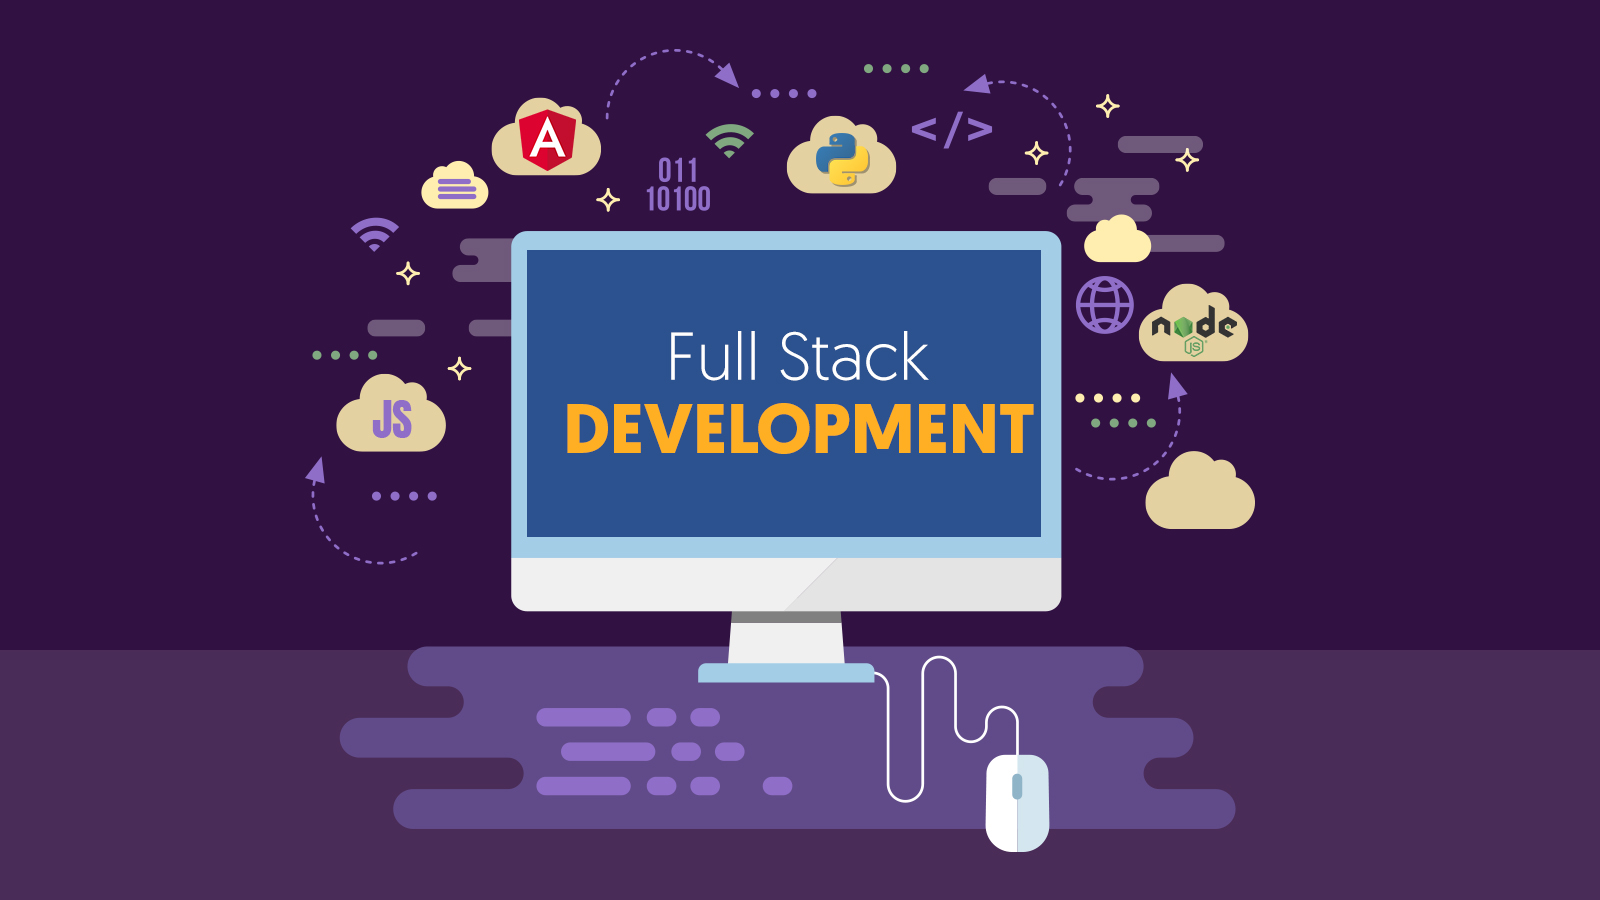 Required Skills and Responsibilities For Full-Stack Developer